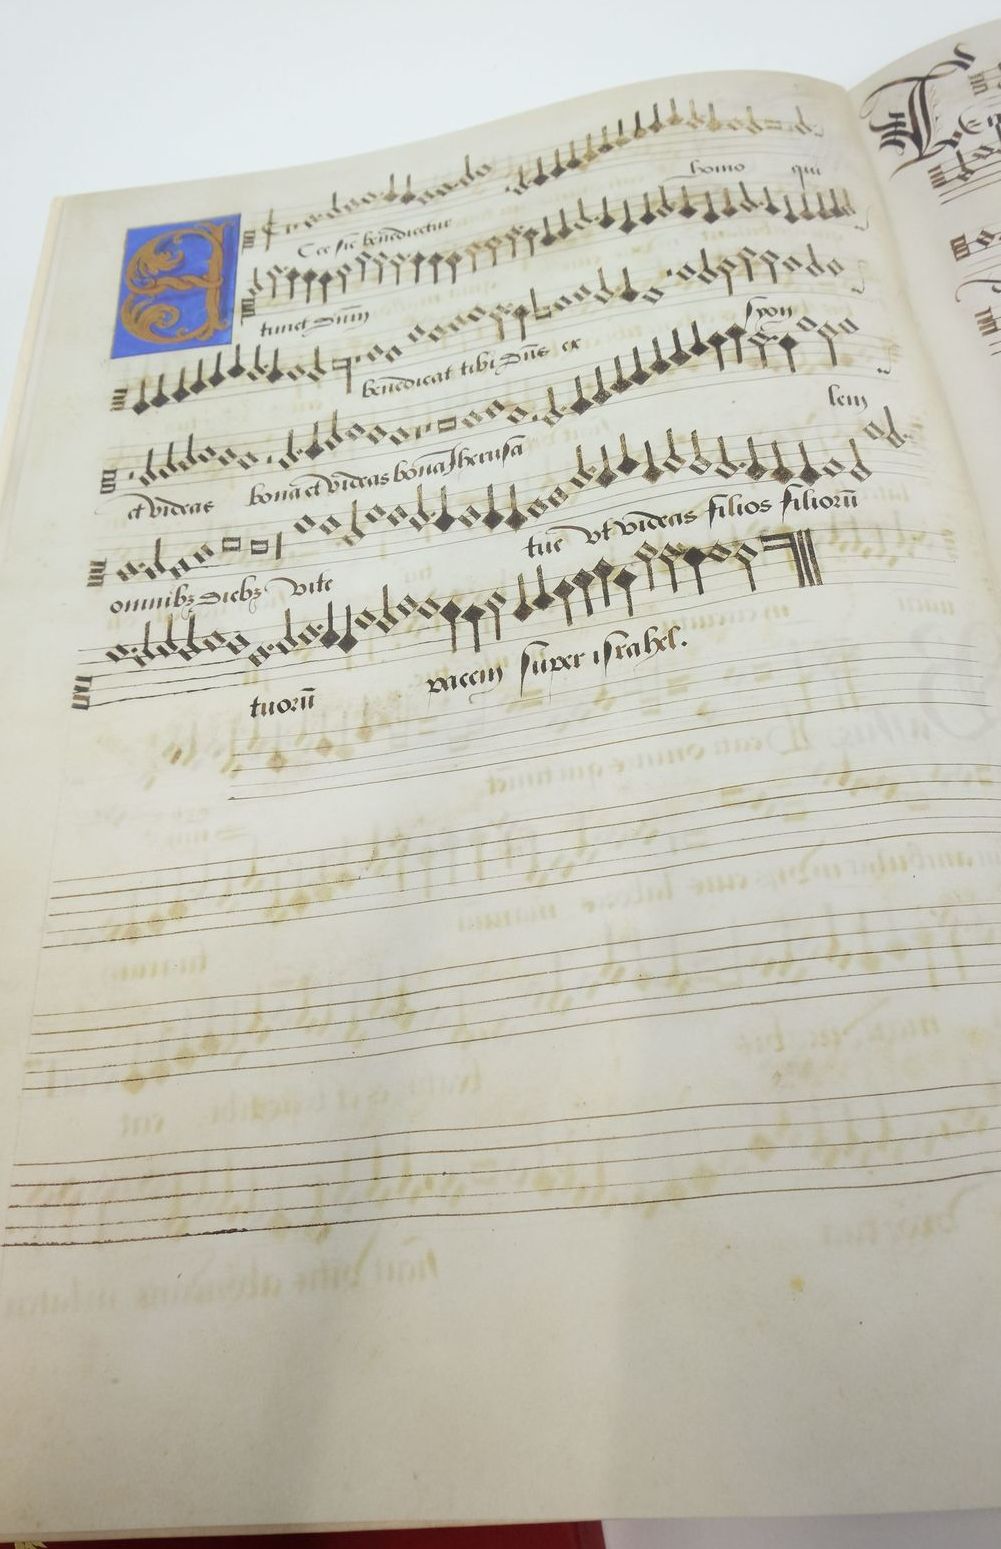 Photo of MUSIC FOR KING HENRY written by Bell, Nicolas
Skinner, David published by Folio Society (STOCK CODE: 1821643)  for sale by Stella & Rose's Books